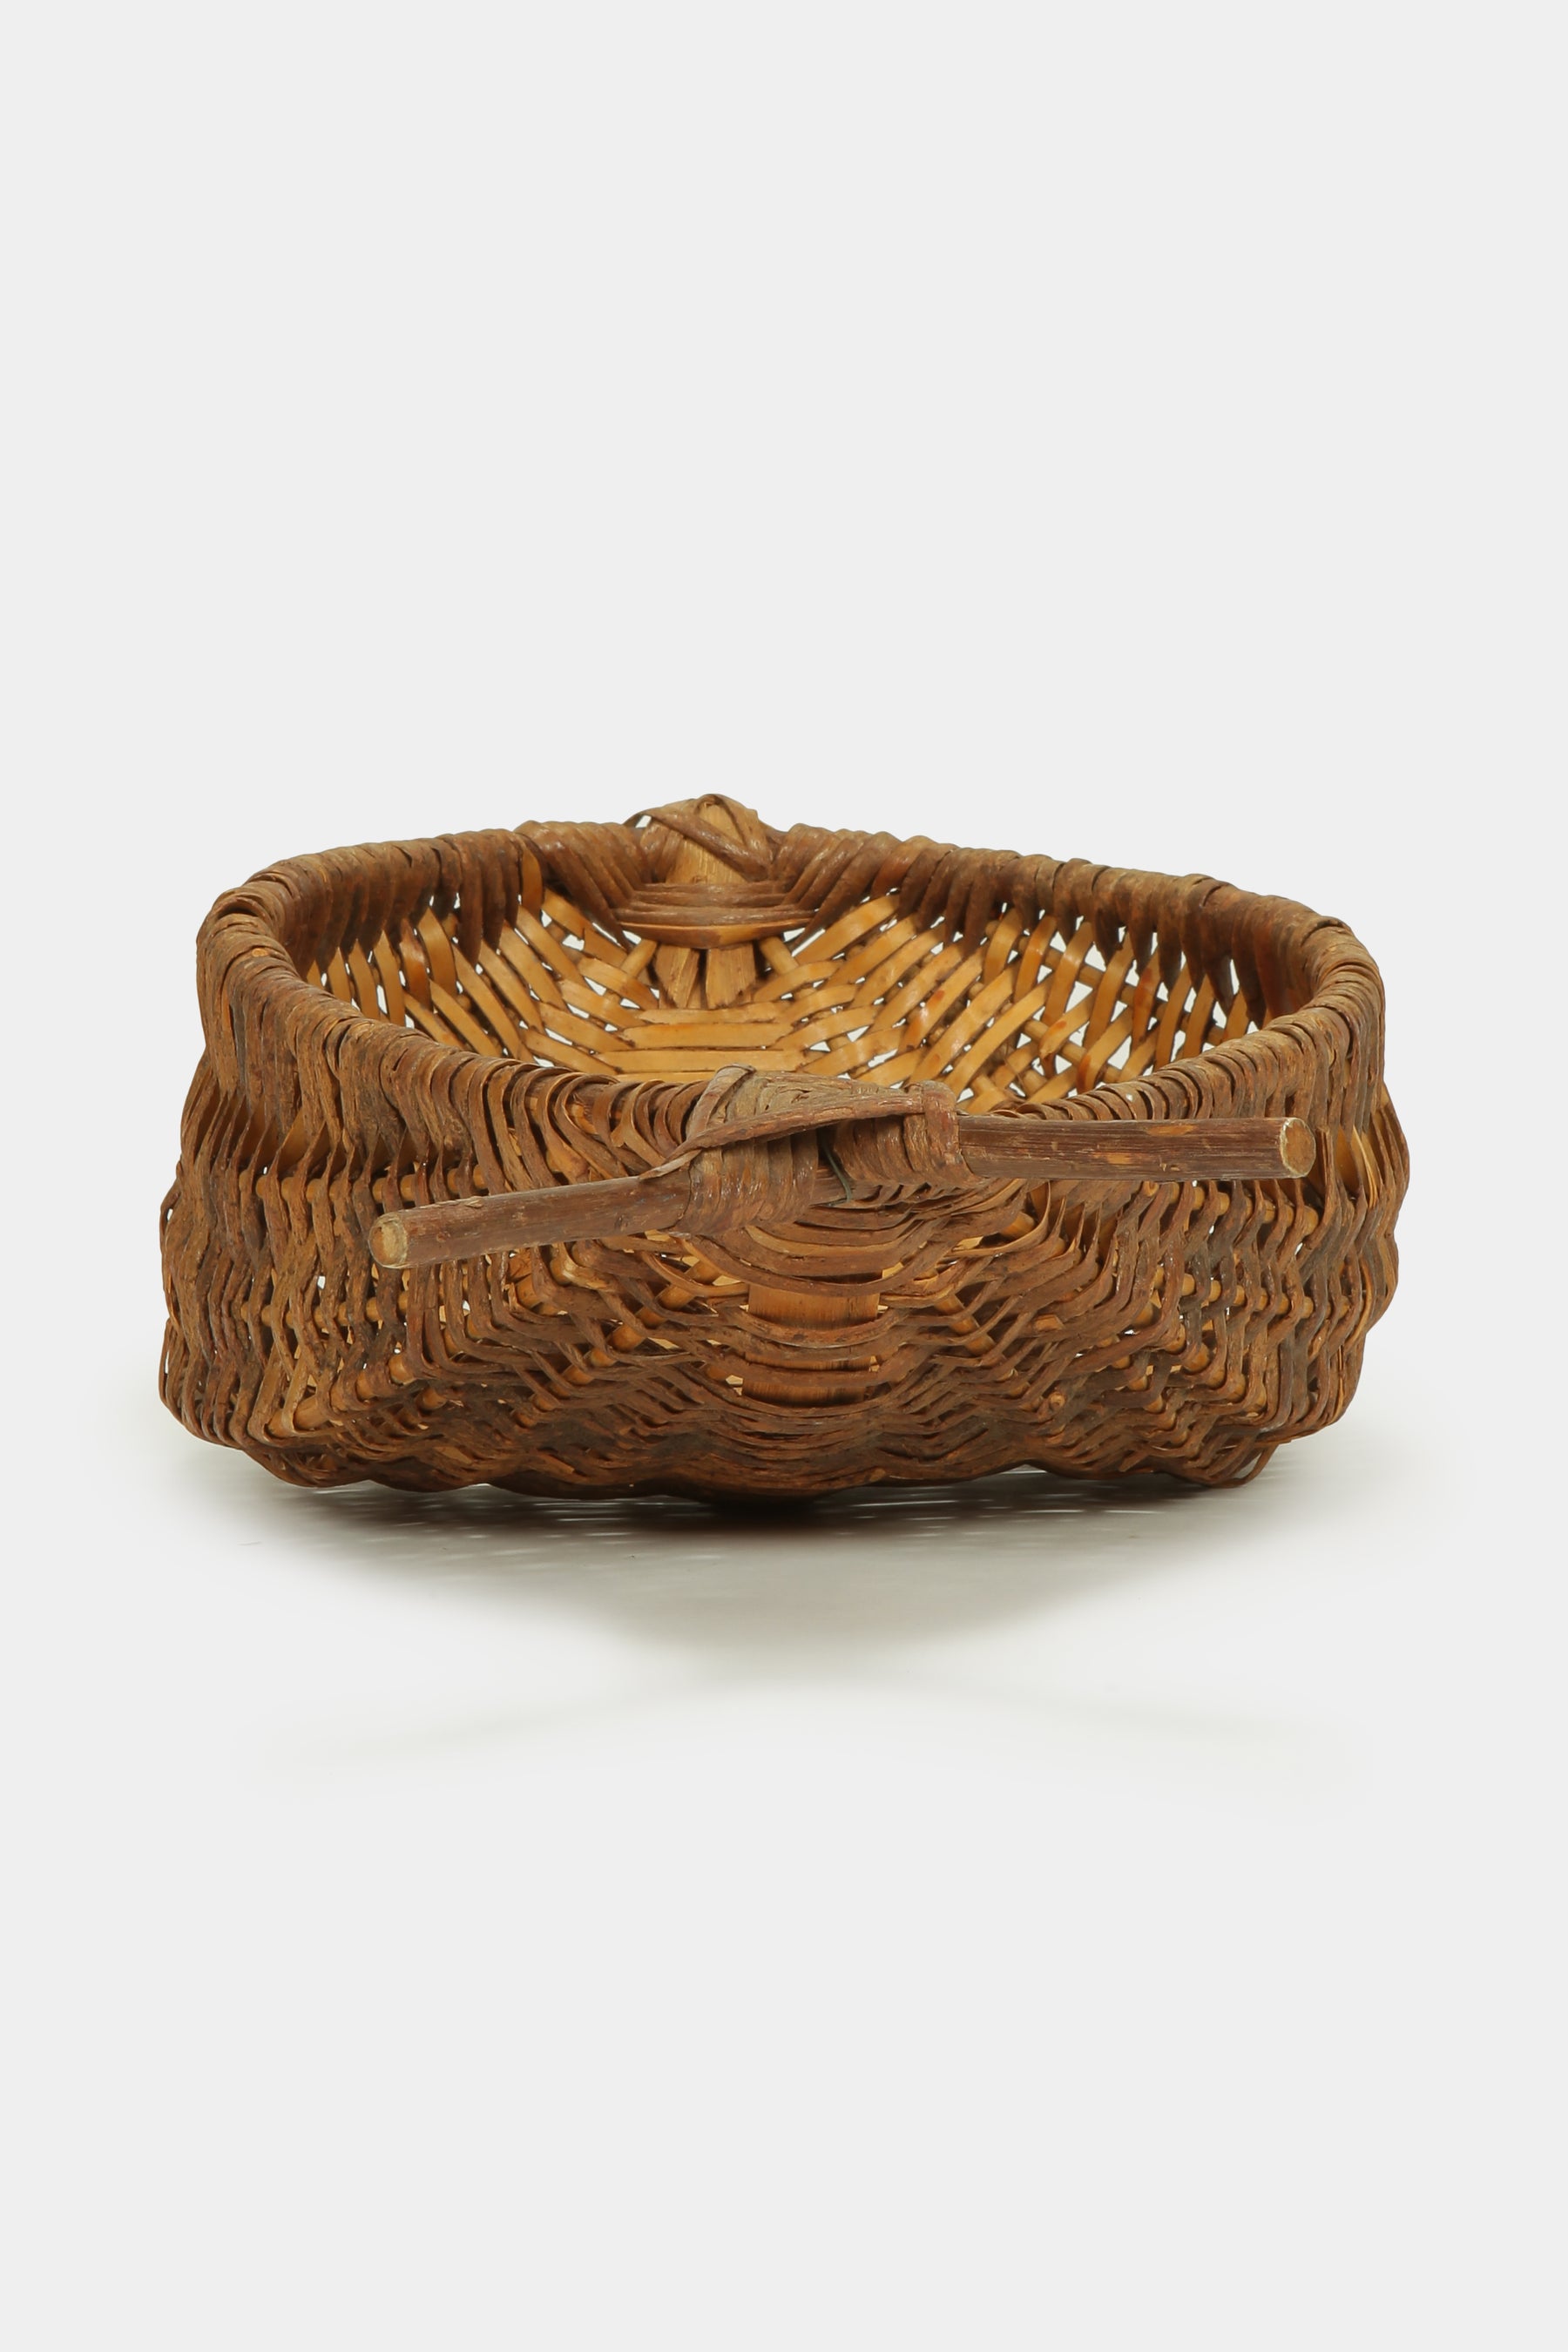 Basket in the shape of a fish, France, 50s